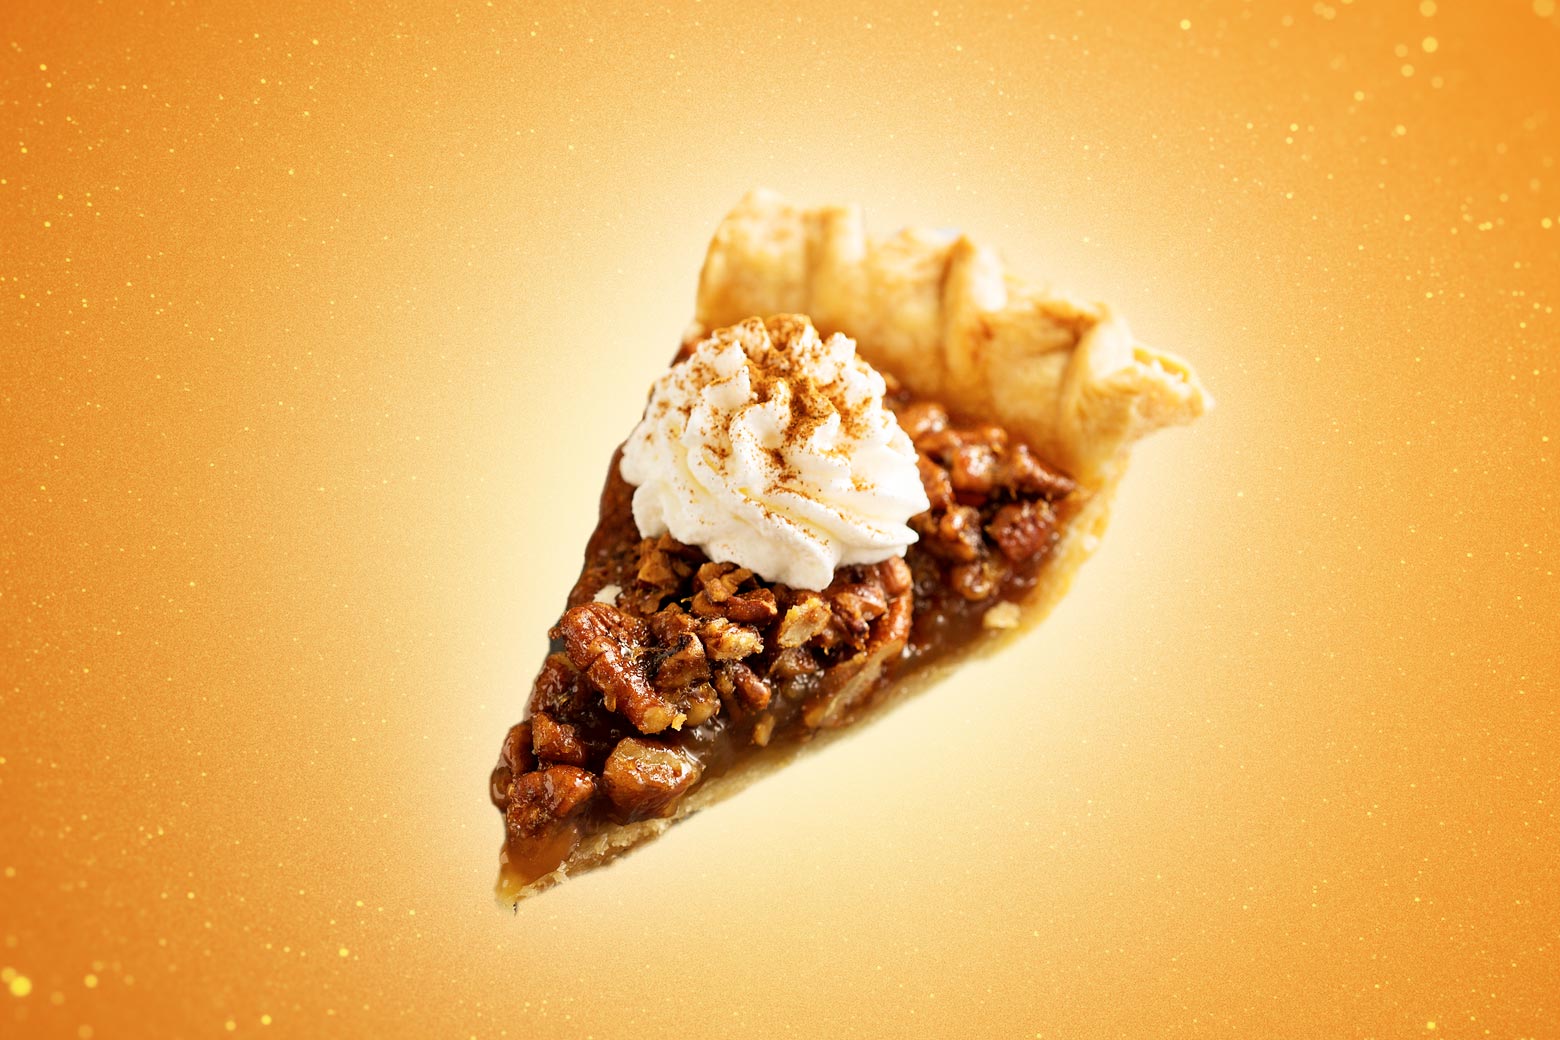 A slice of pecan pie, with whipped cream on top, in front of a gold background.